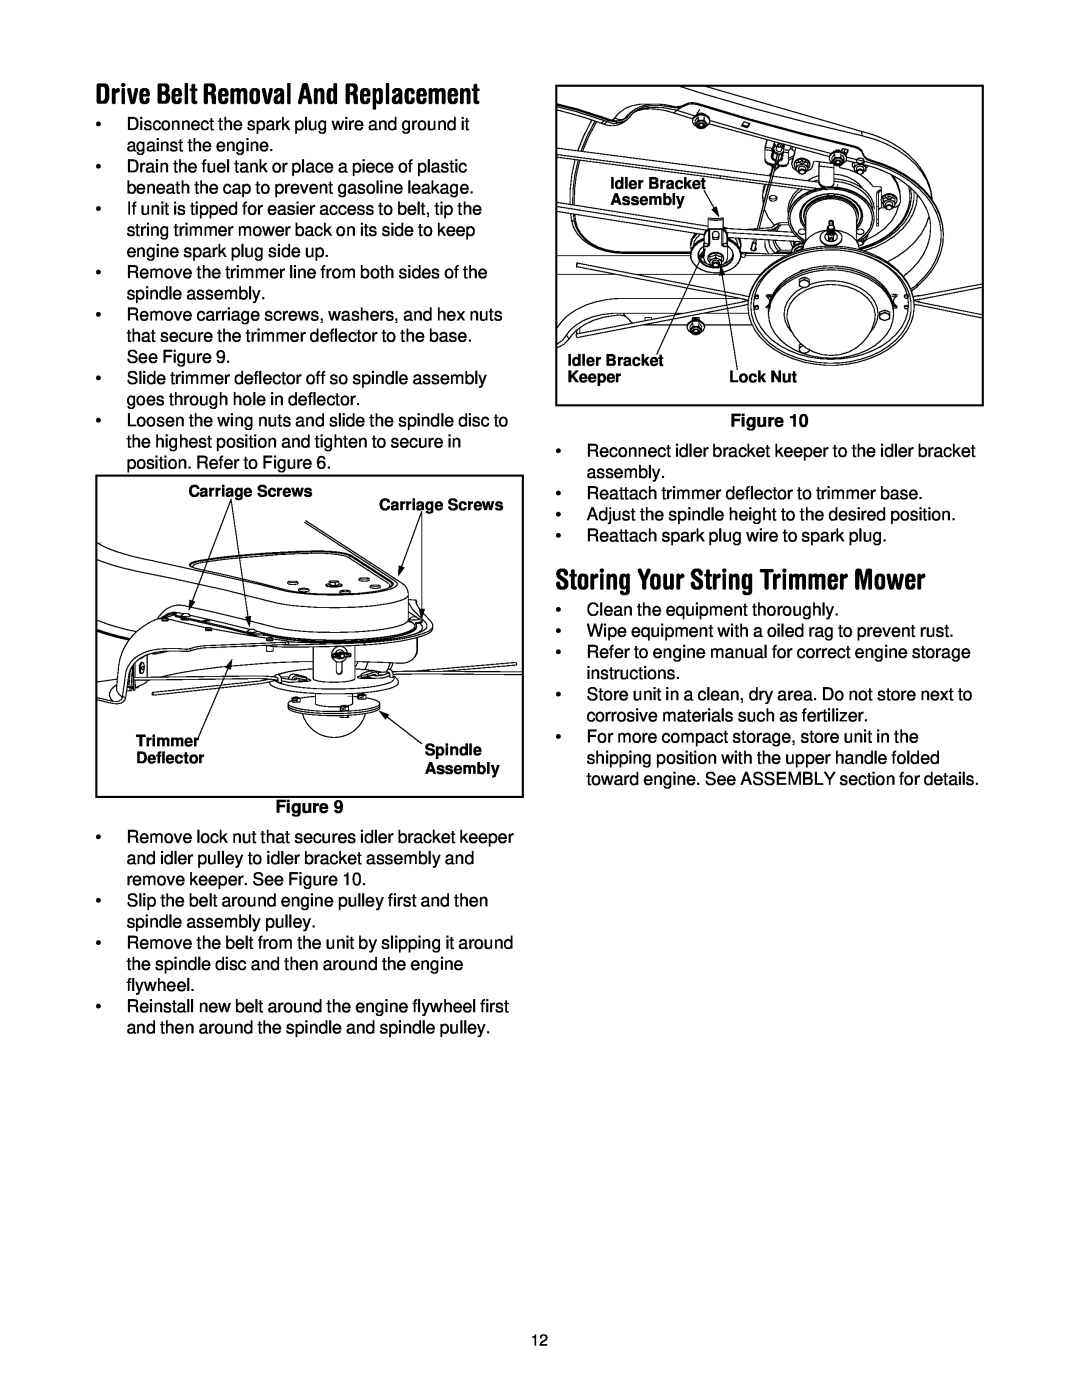 Troy-Bilt 258 manual Storing Your String Trimmer Mower, Drive Belt Removal And Replacement 